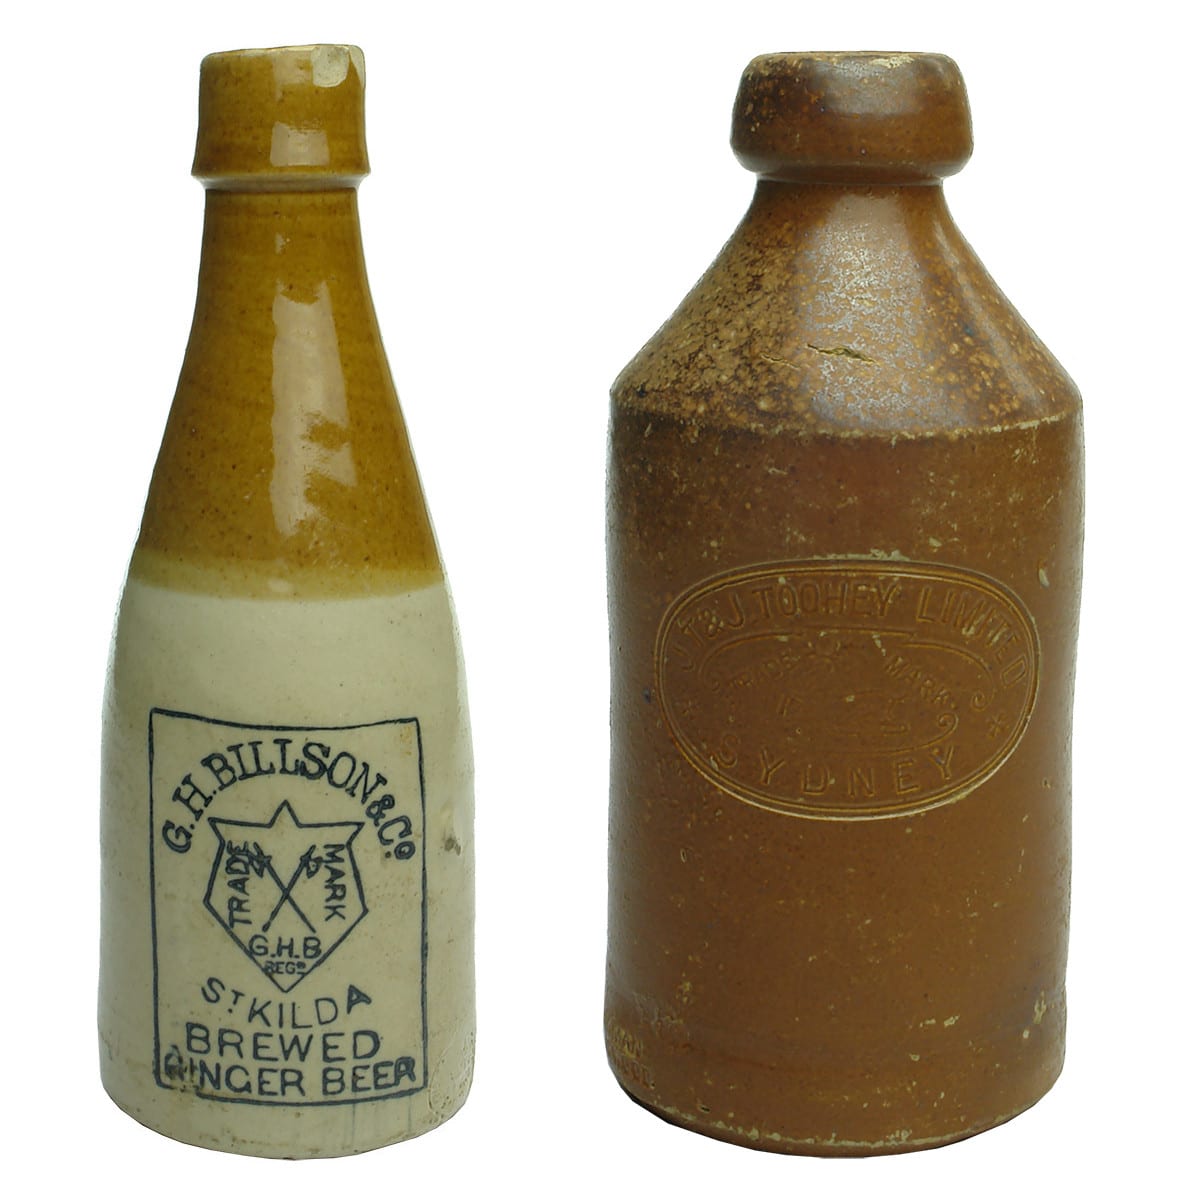 2 Ginger Beers. G. H. Billson & Co, St Kilda. Crossed Axes; J. T. & J. Toohey, Sydney. (Victoria & New South Wales)